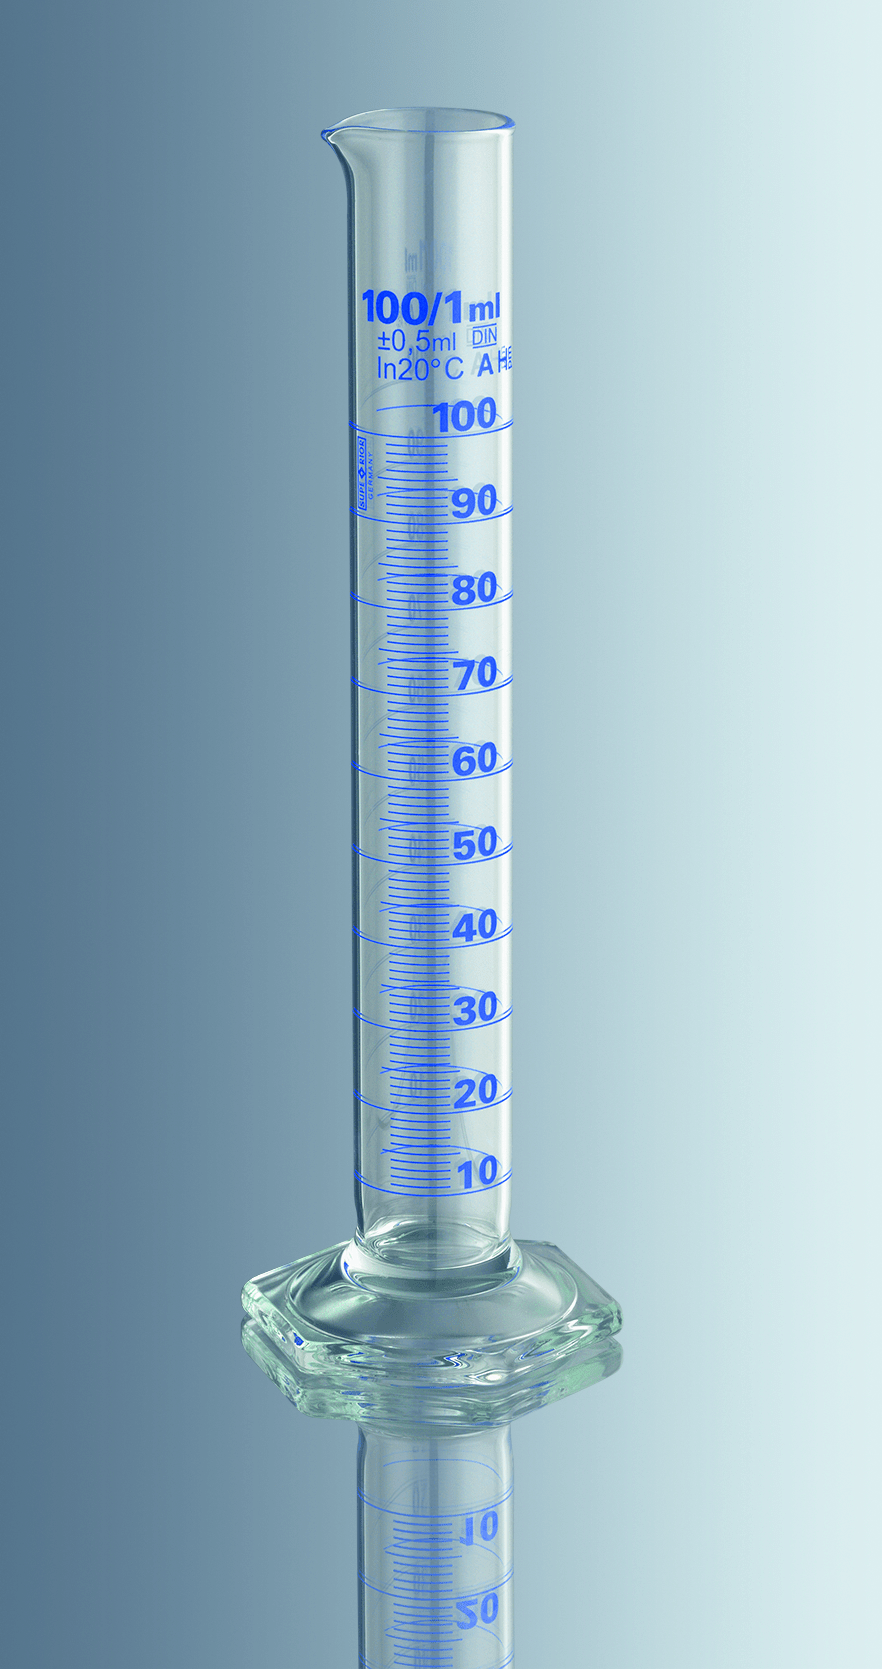 Marienfeld (Germany) Measuring Cylinder 10ml Class A(Lot Certified) - Hex base, High quality Borosil.Glass